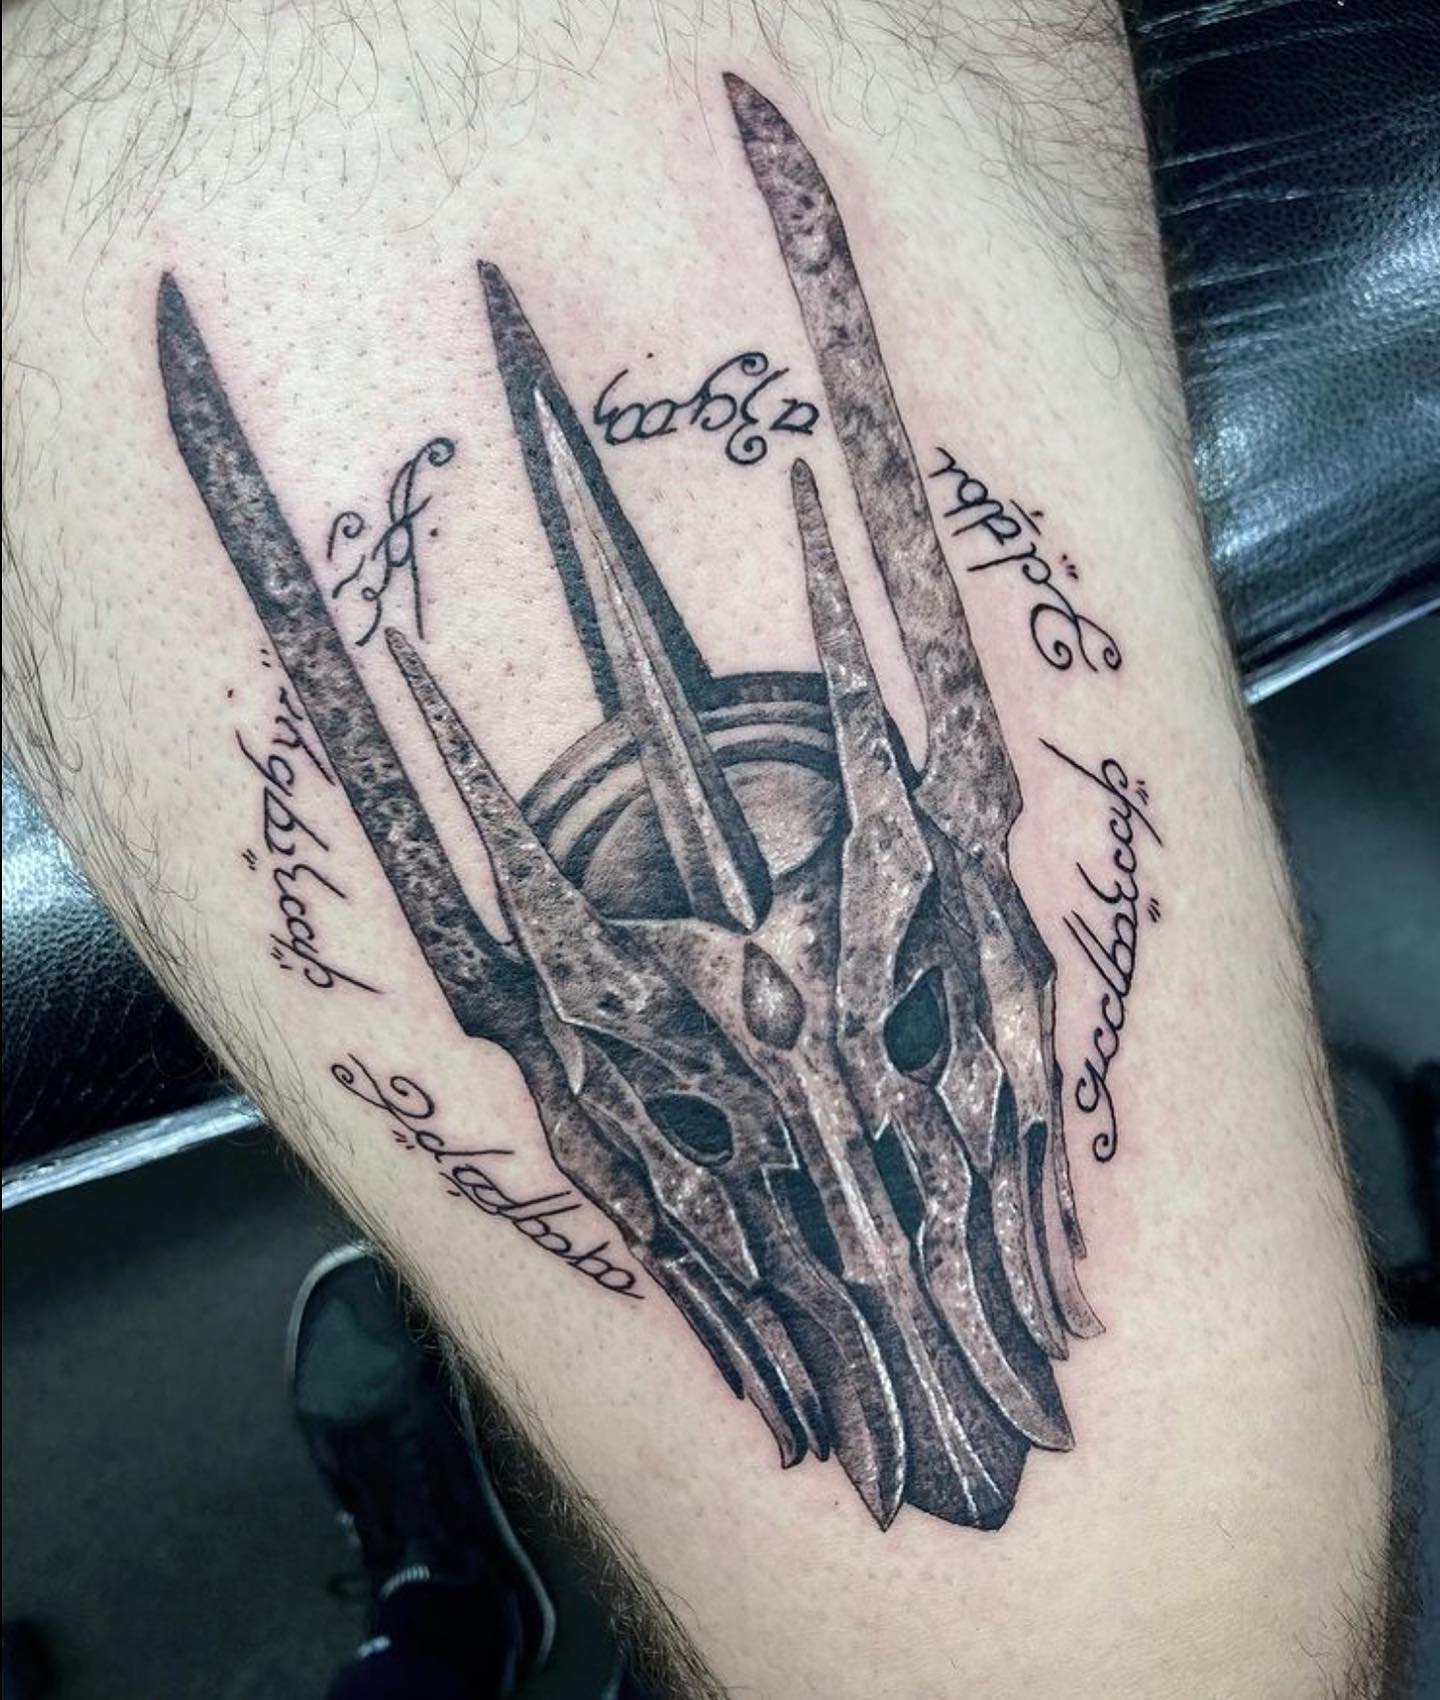 Lord of the rings piece from our talented artist sungazerink 

As always, if you like his work and are interested in getting booked in, feel free to fill in a tattoo enquiry form on our website to get a quote. He currently has small spaces from the middle of May. 

             